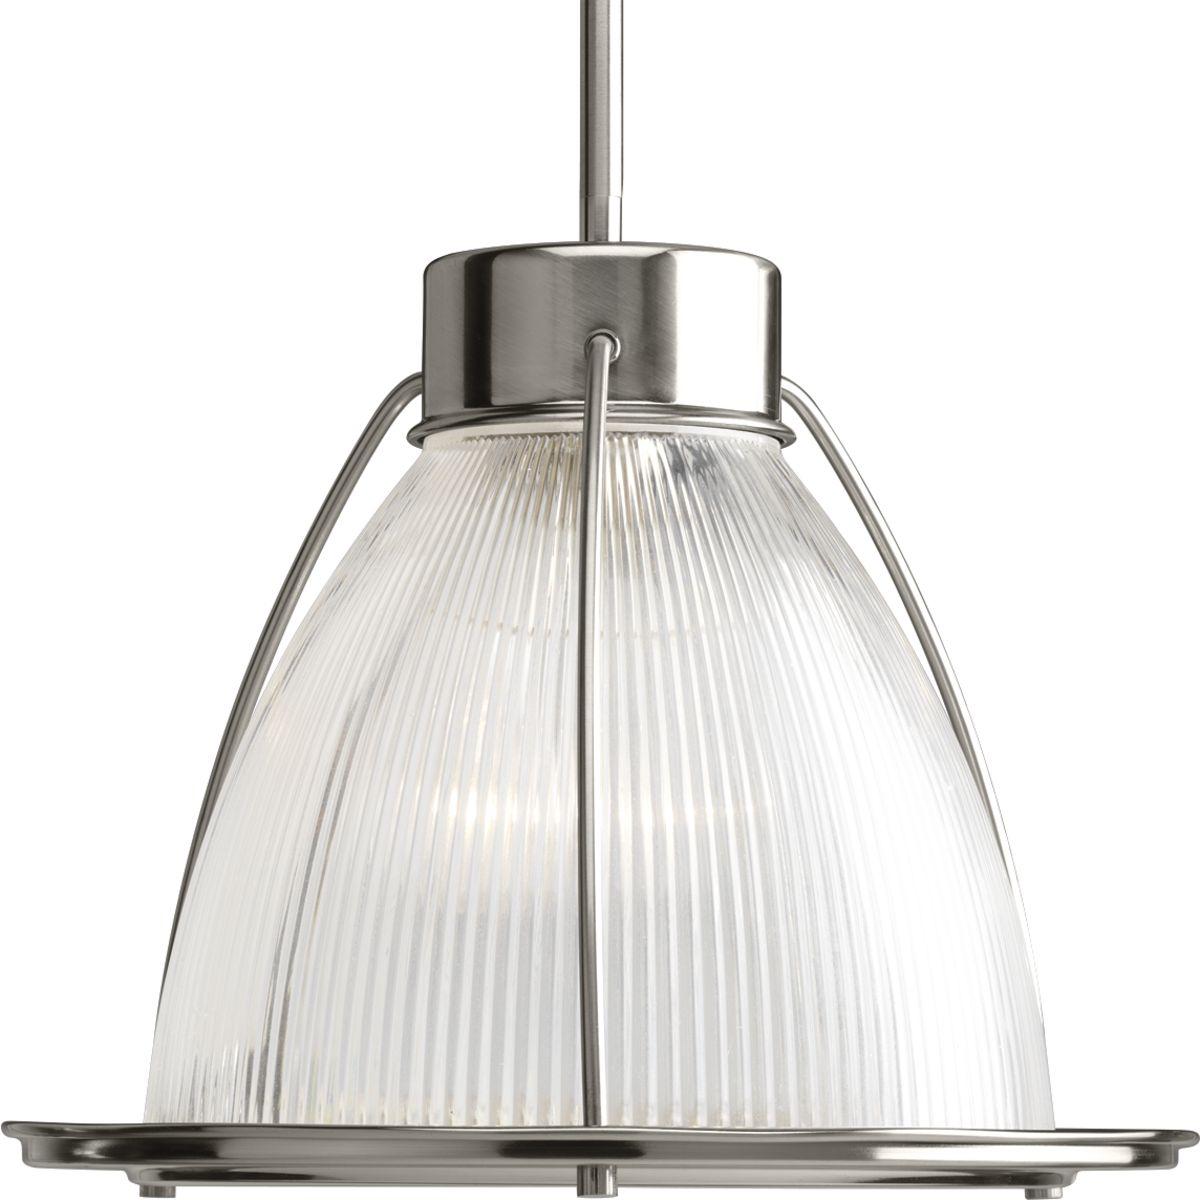 Hubbell P5182-09 One-light 12-3/4" pendant with prismatic glass shade for a sleek industrial look. Clear prismatic glass is highlighted with brushed nickel accents.  ; Brushed Nickel finish. ; Bold and striking Prismatic Glass shade. ; A sleek industrial look. ; Includes 